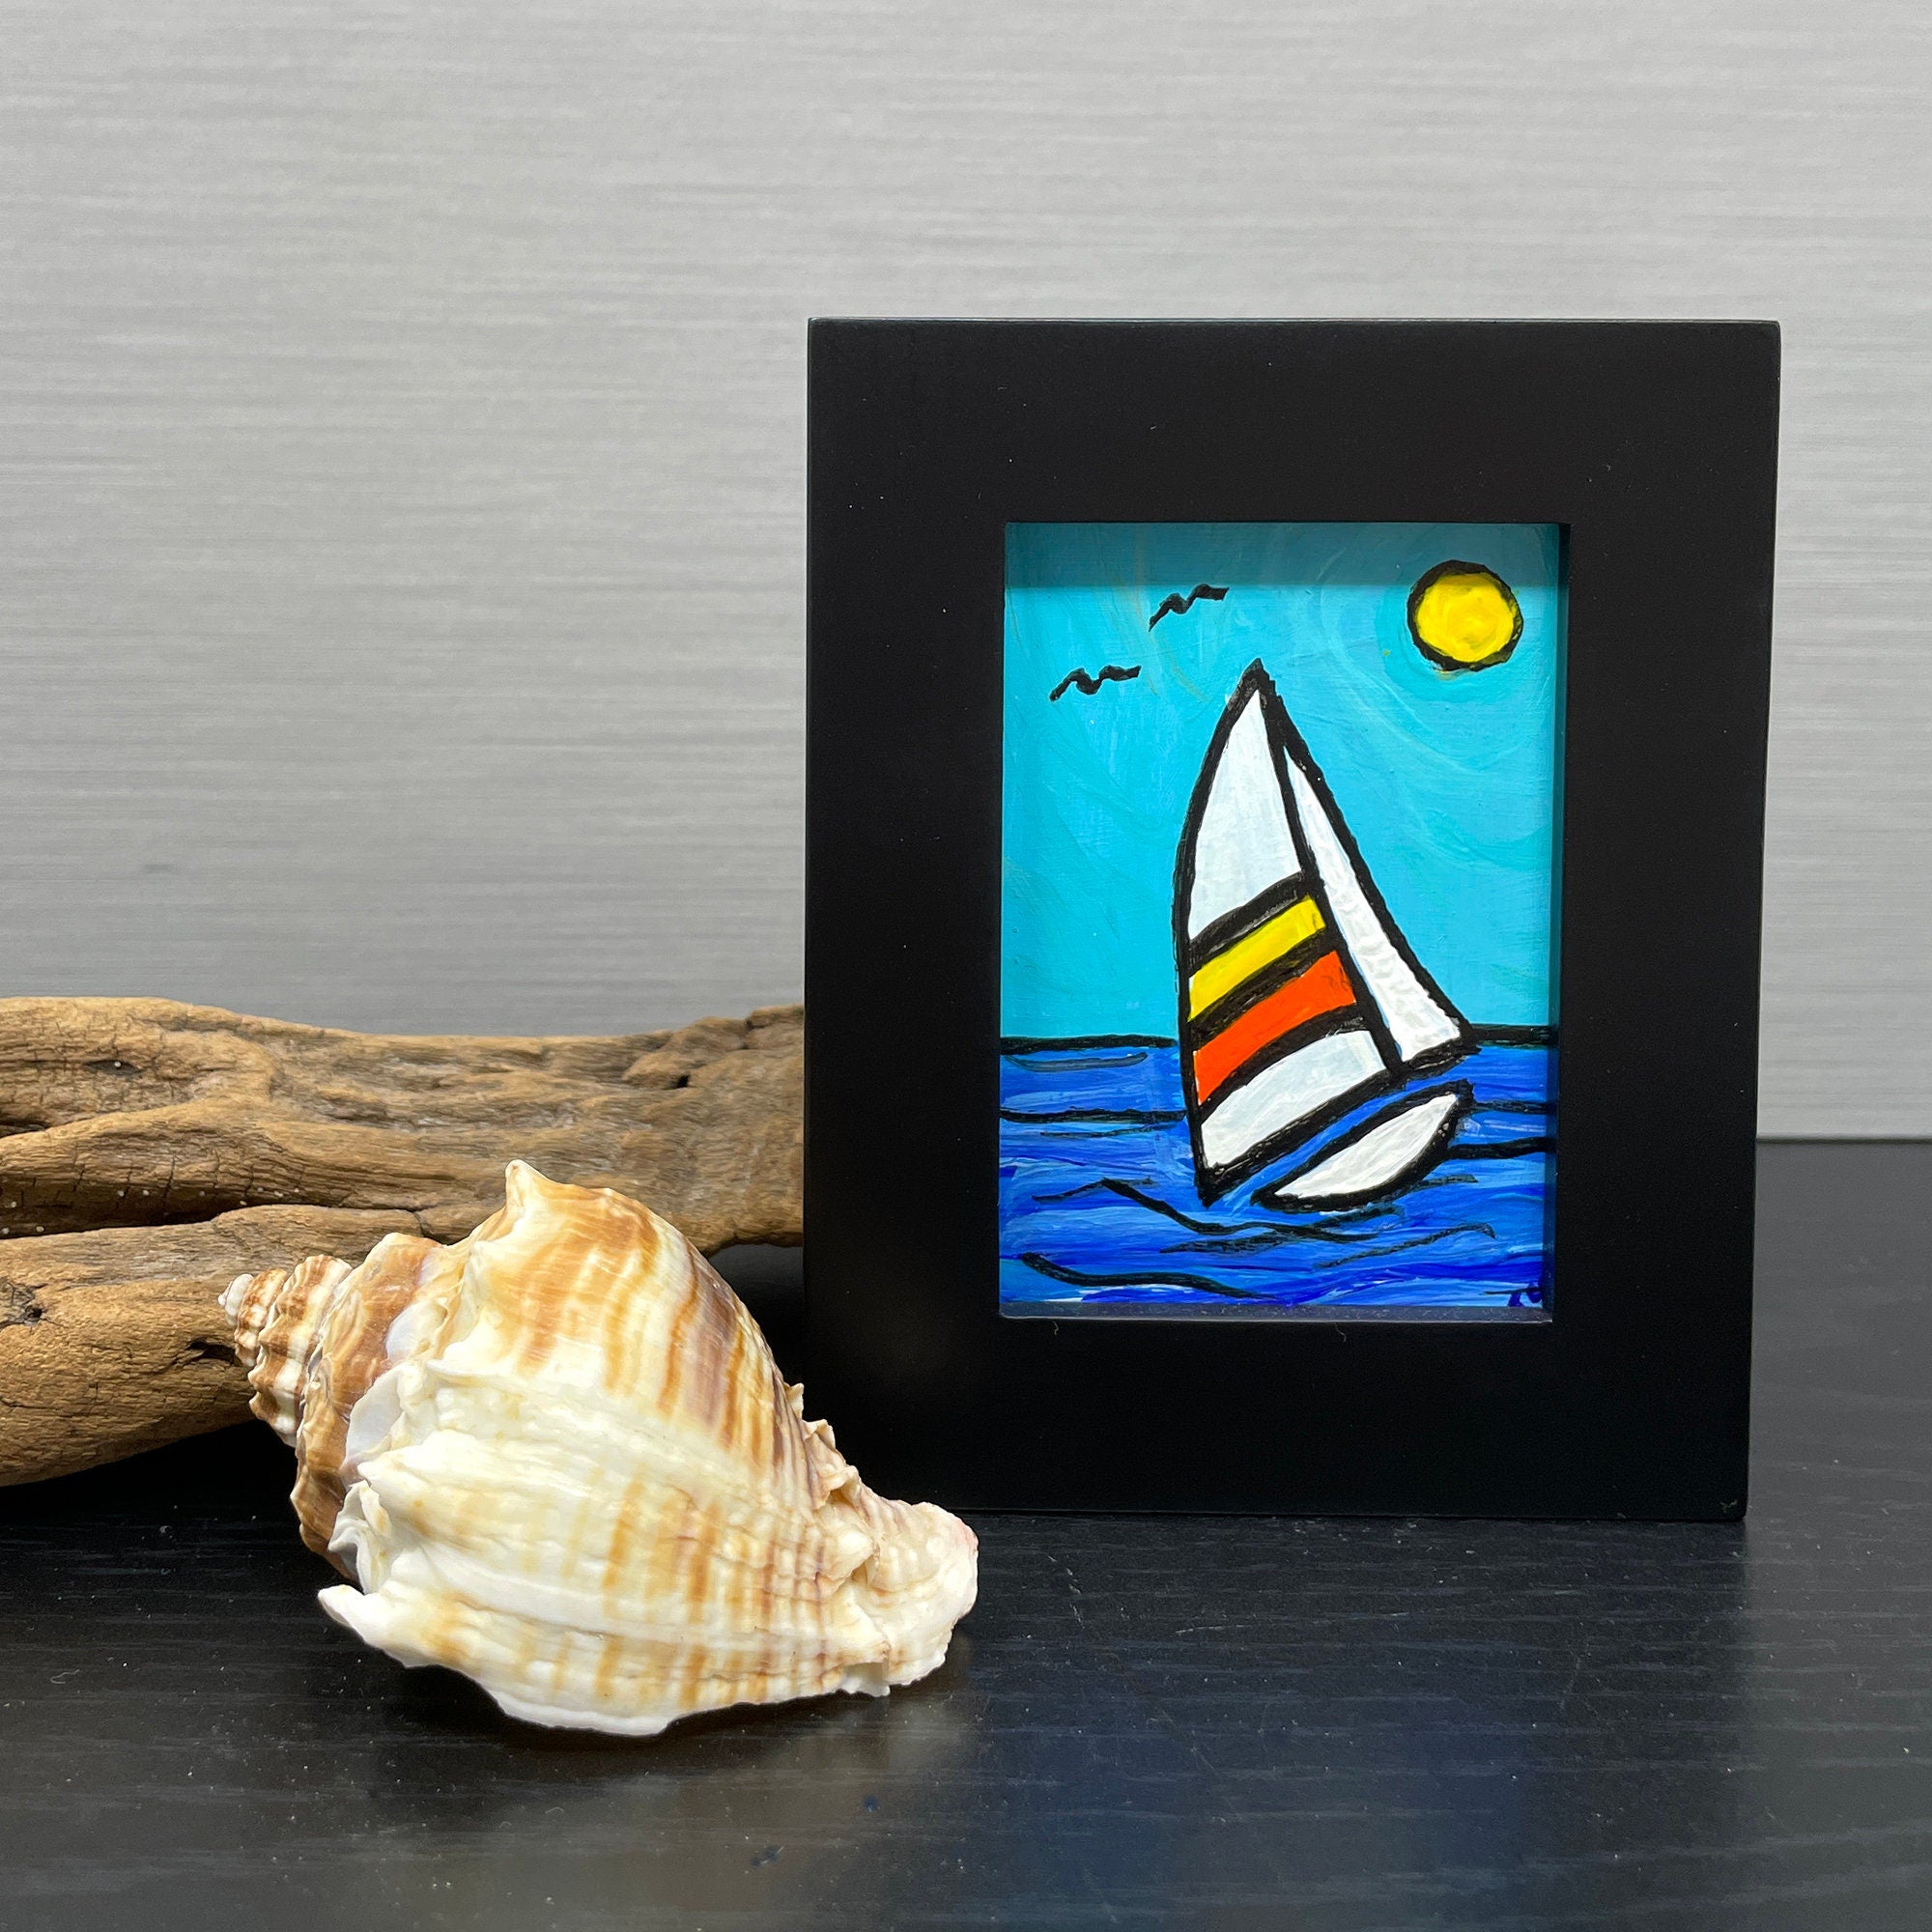 Mini Sailboat Painting in Frame - Original Nautical Art for Desk, Shelf, or Wall - Small Miniature Painting